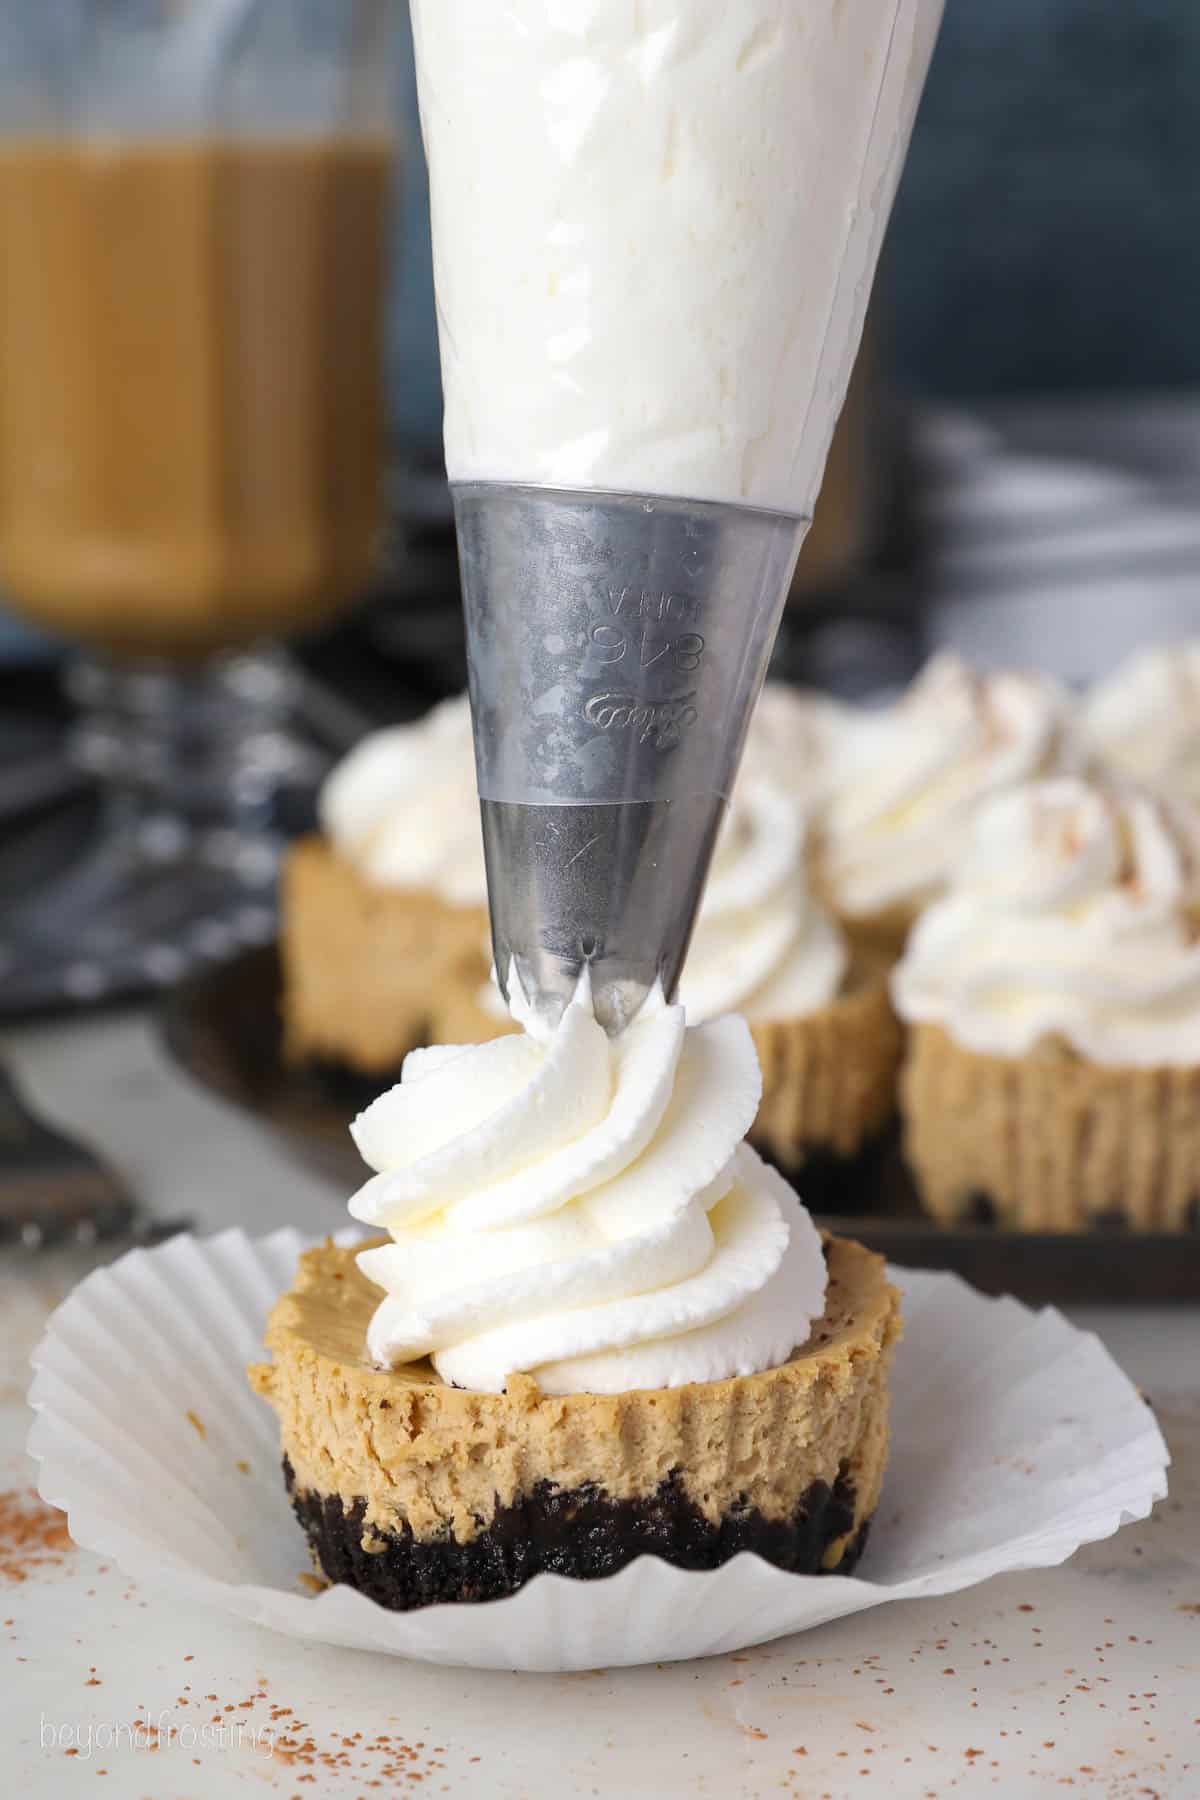 Whipped cream being piped onto the top of a mini cheesecake with Oreo crust